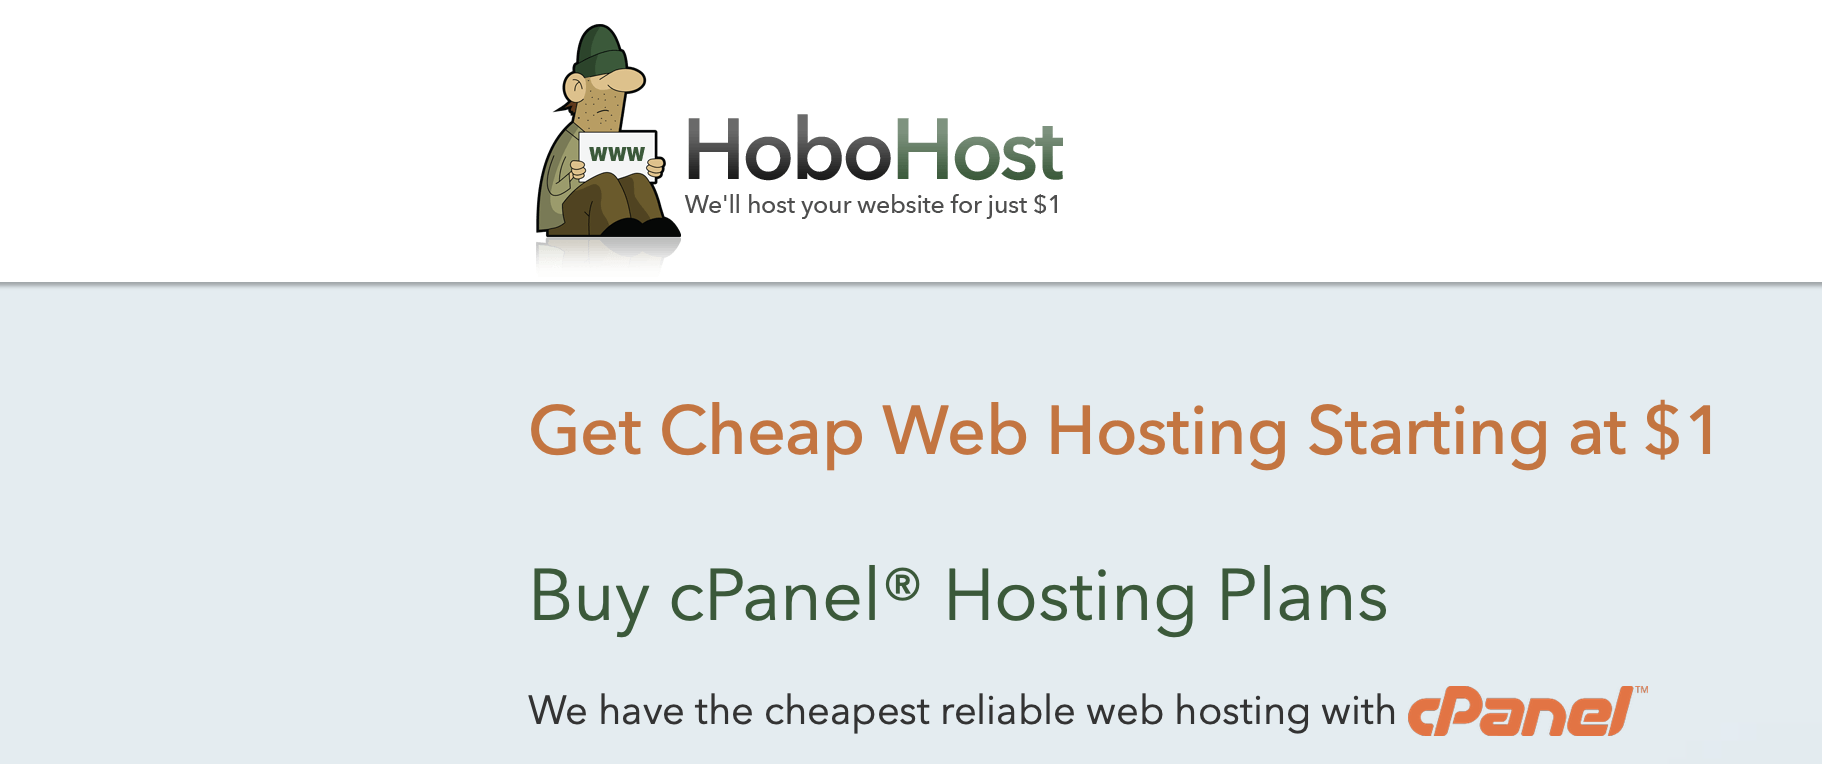 Why cPanel For My Website